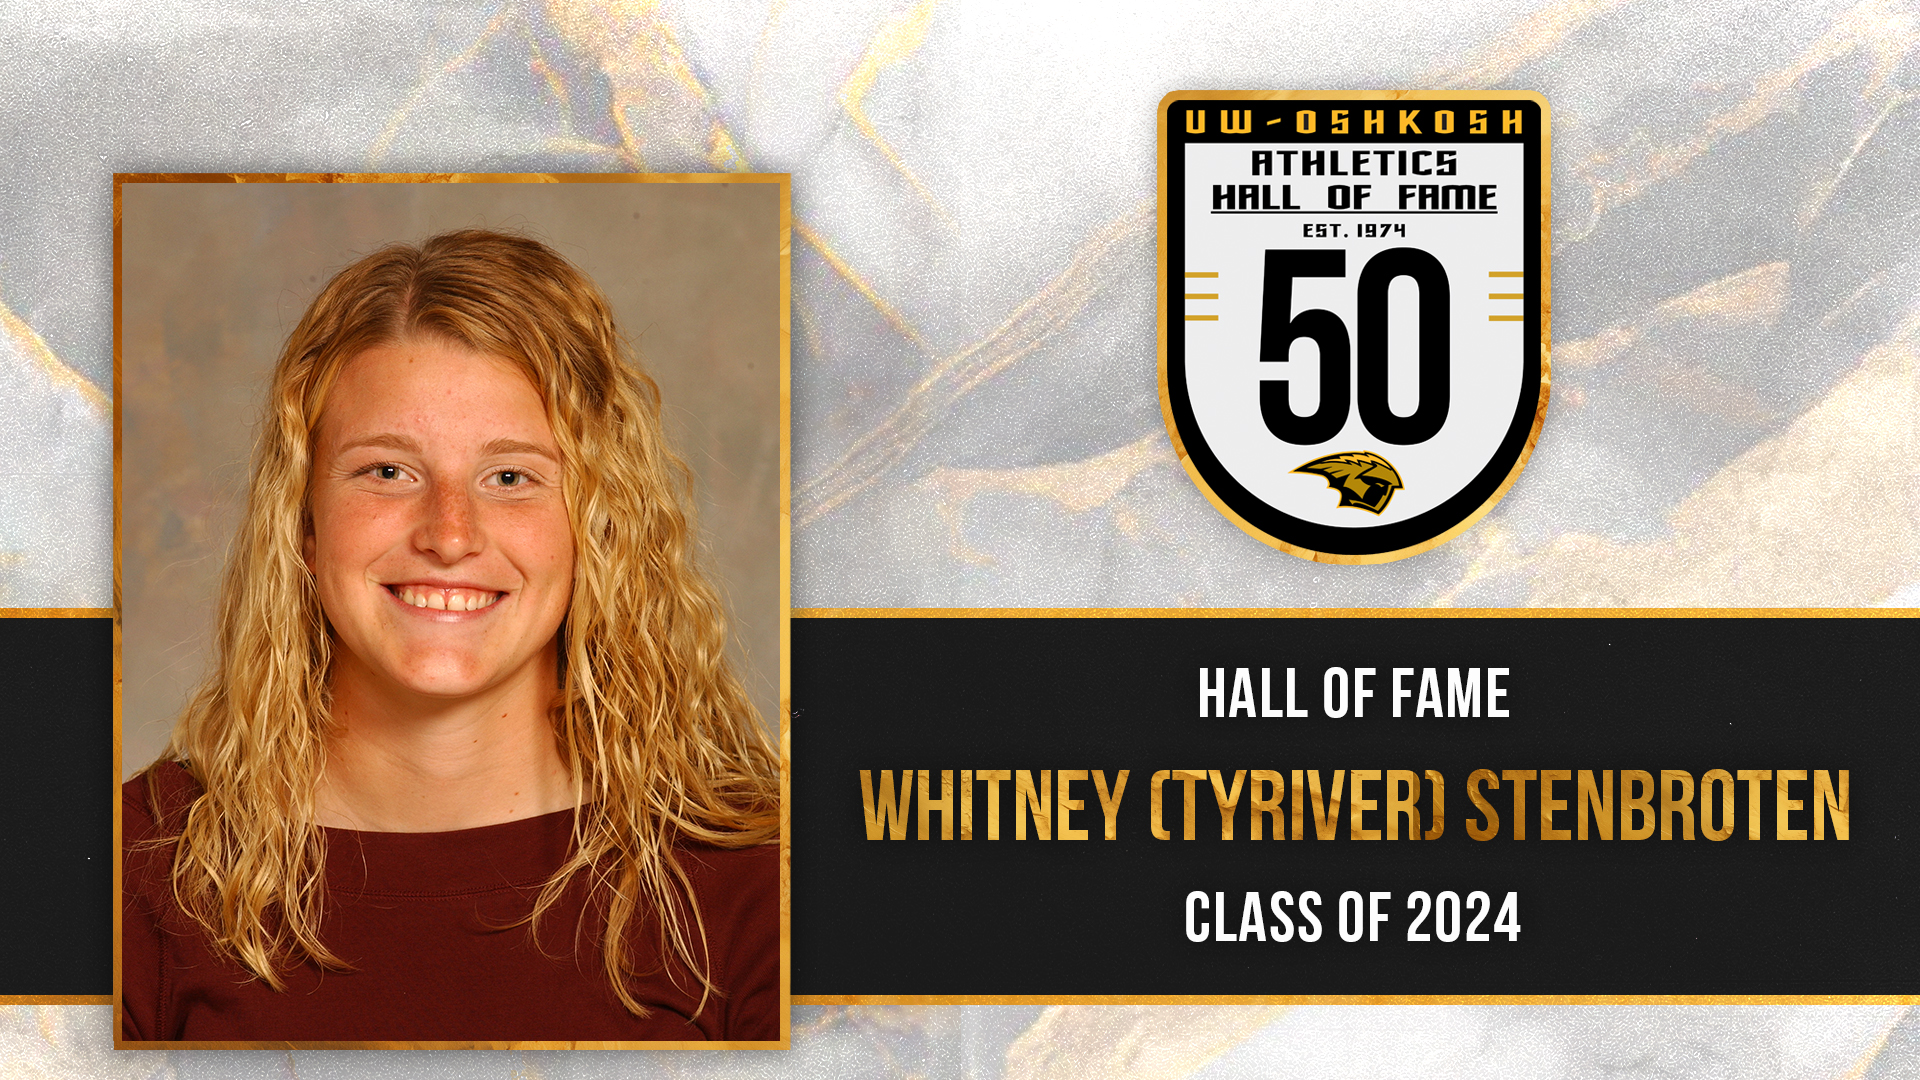 Hall Of Fame Inductee: Whitney (Tyriver) Stenbroten